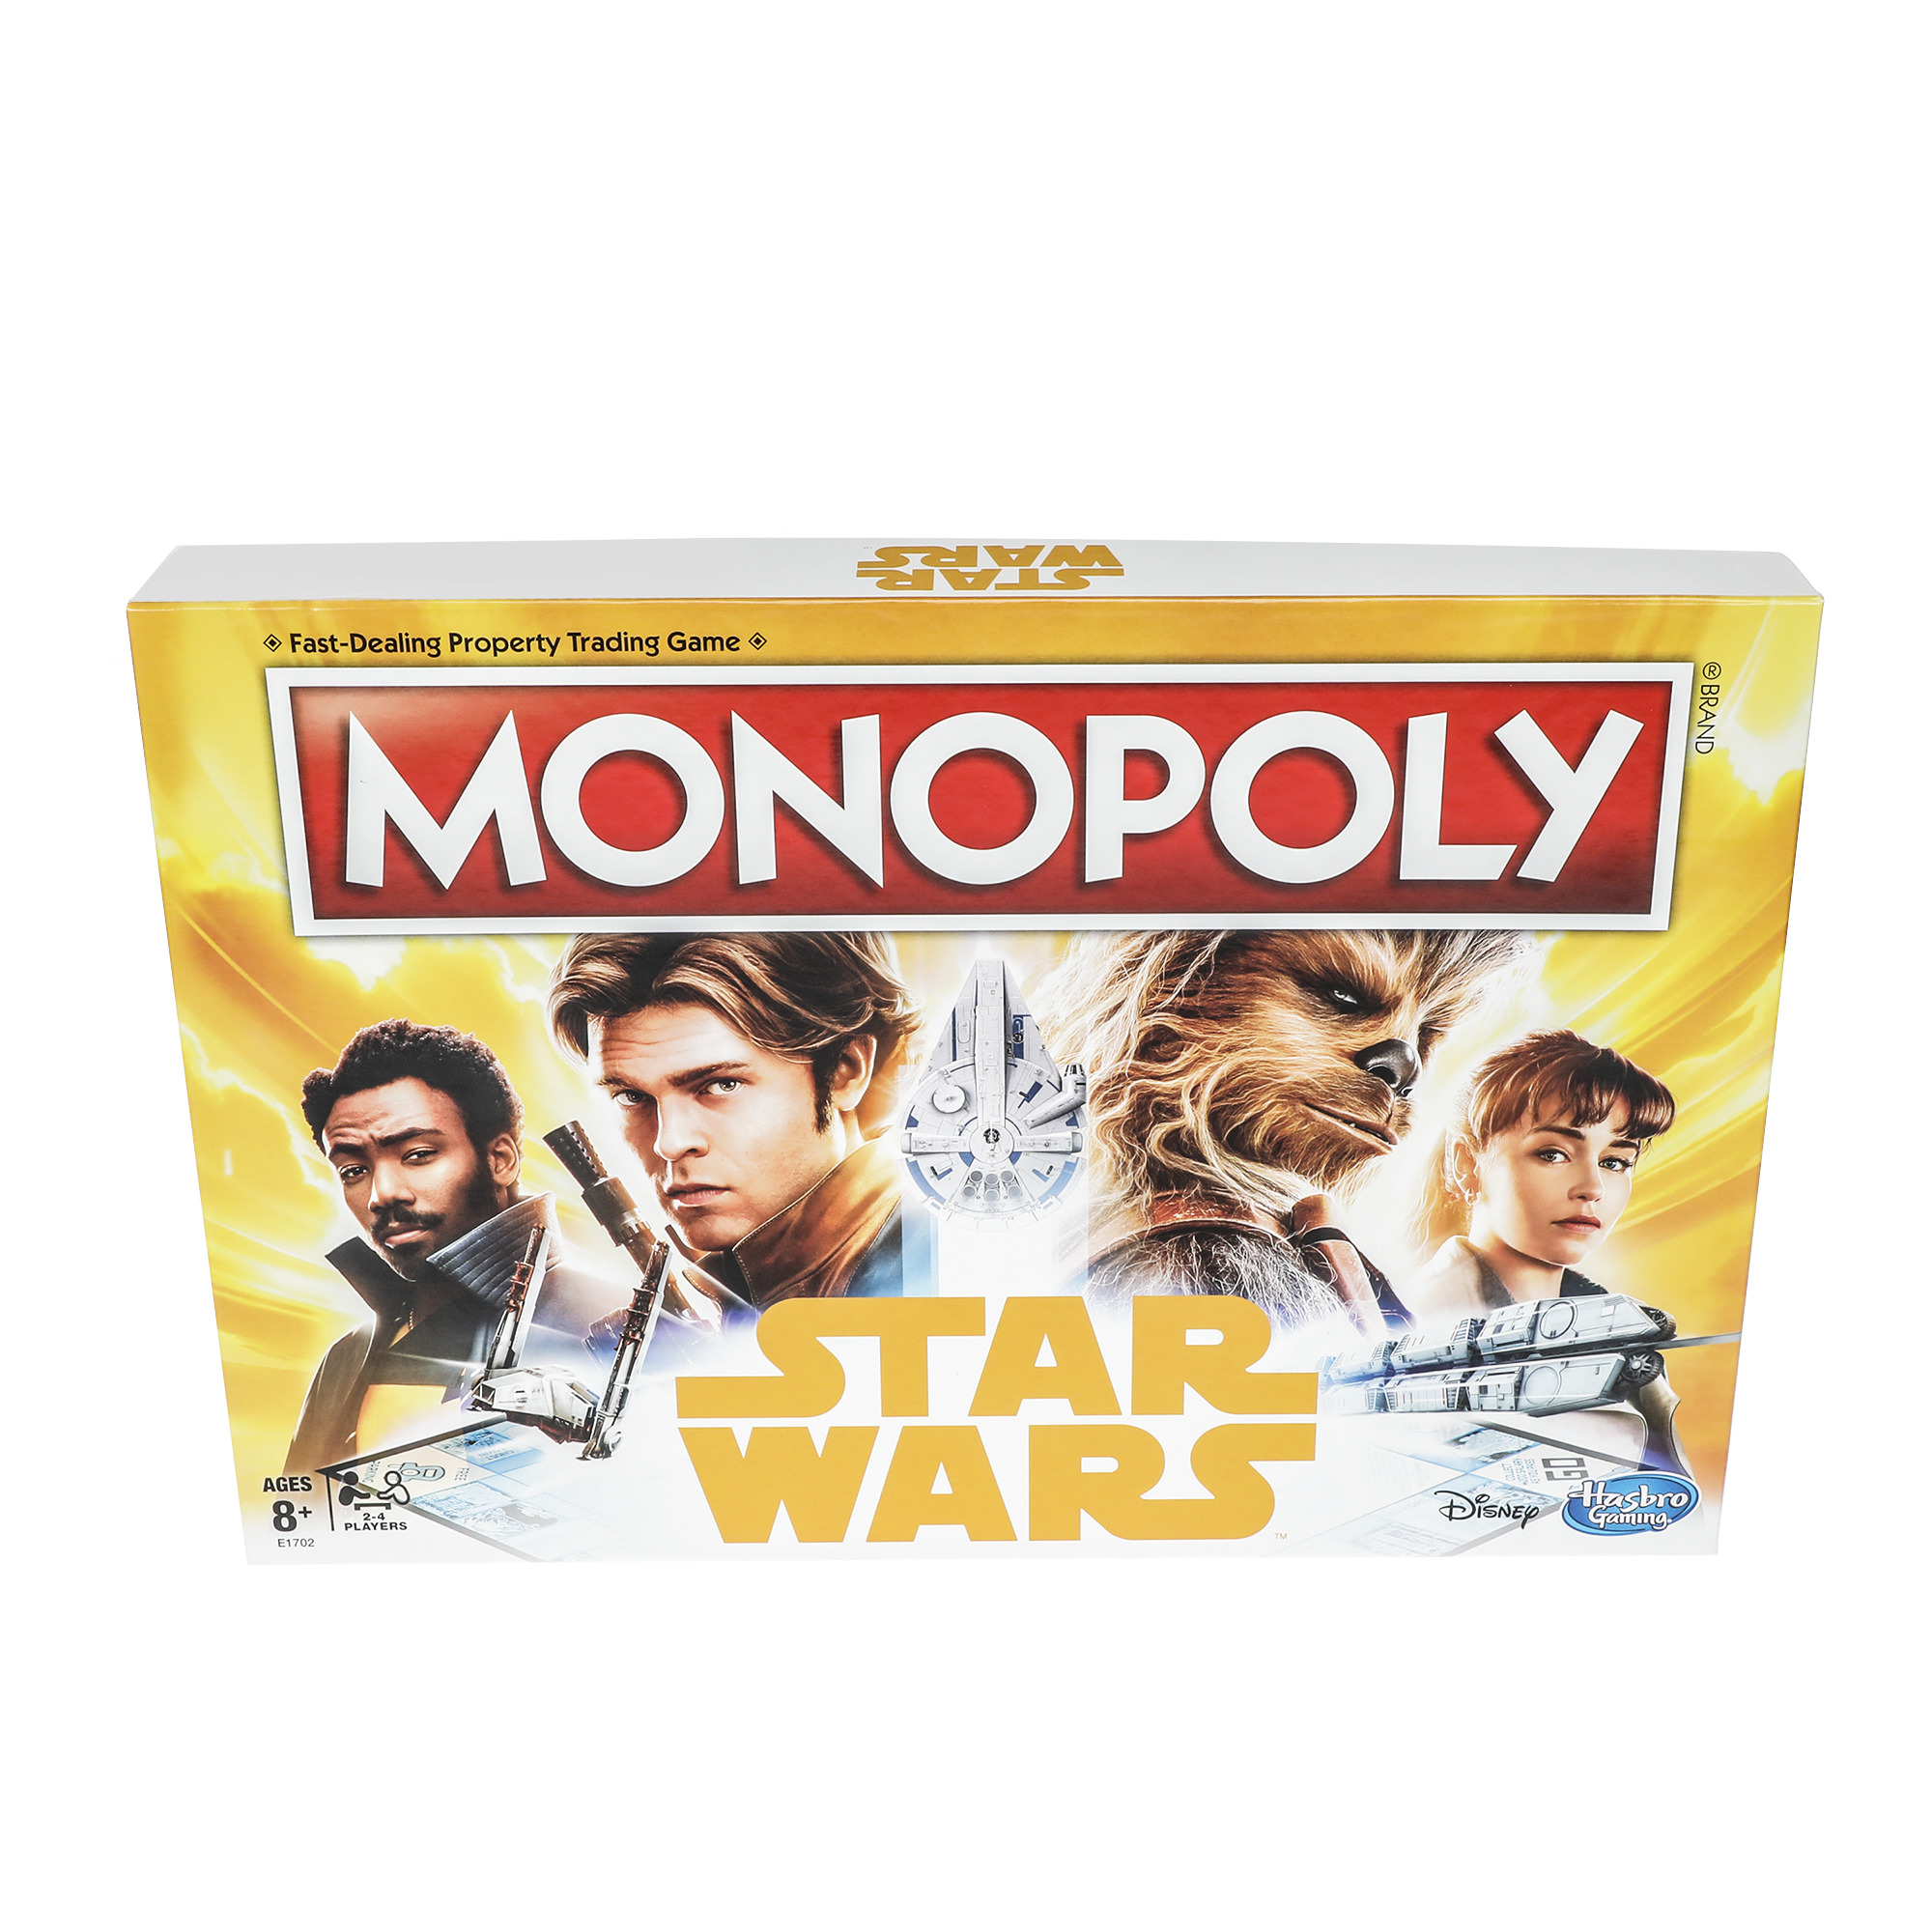 Monopoly Game: Star Wars - Han Solo Edition - image 1 of 13